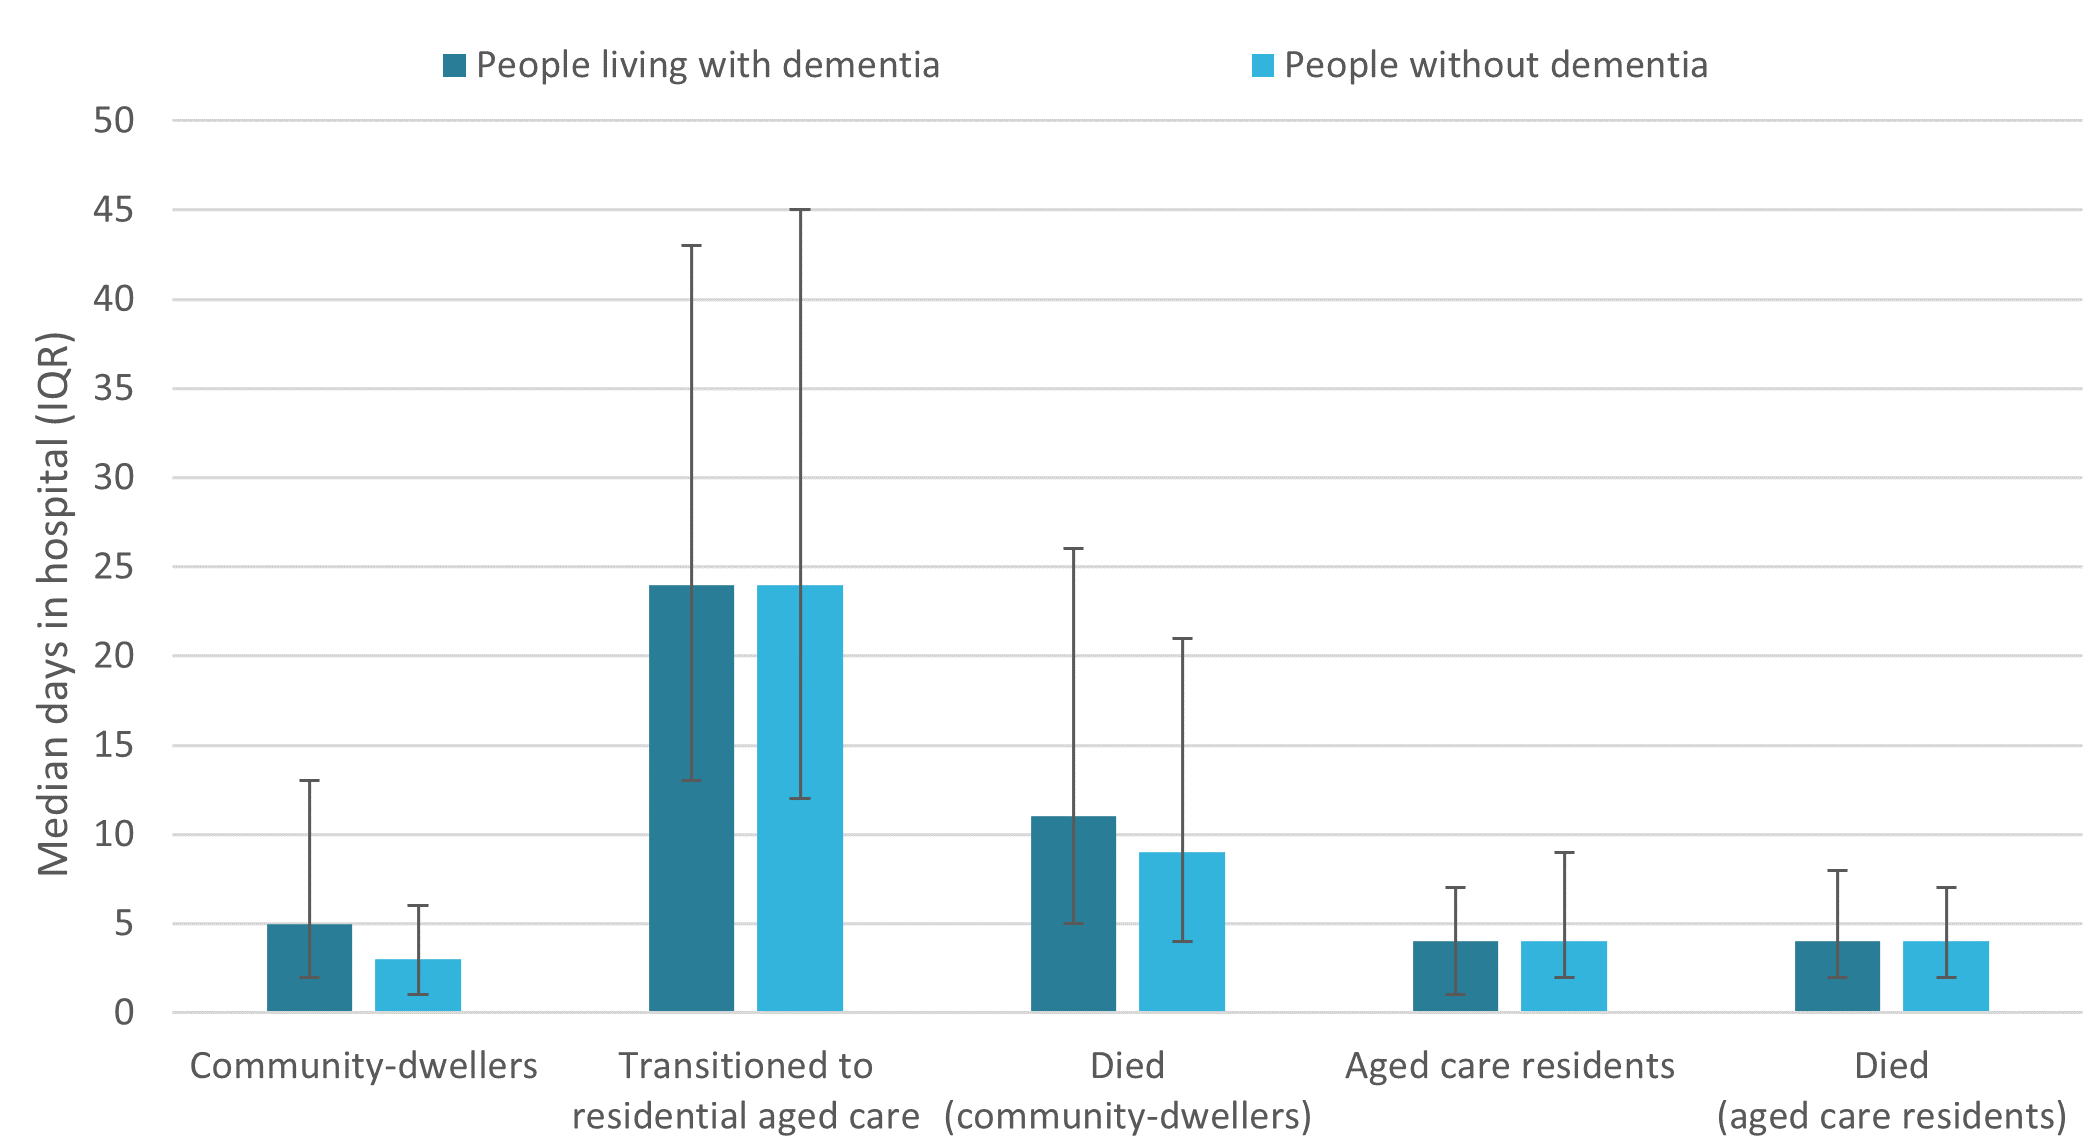 The figure is a bar chart with error bars and shows that for people living with dementia and people without dementia, the median length of stay was longest for people who transitioned to residential aged care (24-days), followed by community-dwellers who died (11-days for people living with dementia and 9-days for people without dementia), and community-dwellers, aged care residents and aged care residents who died (3 to 5-days).